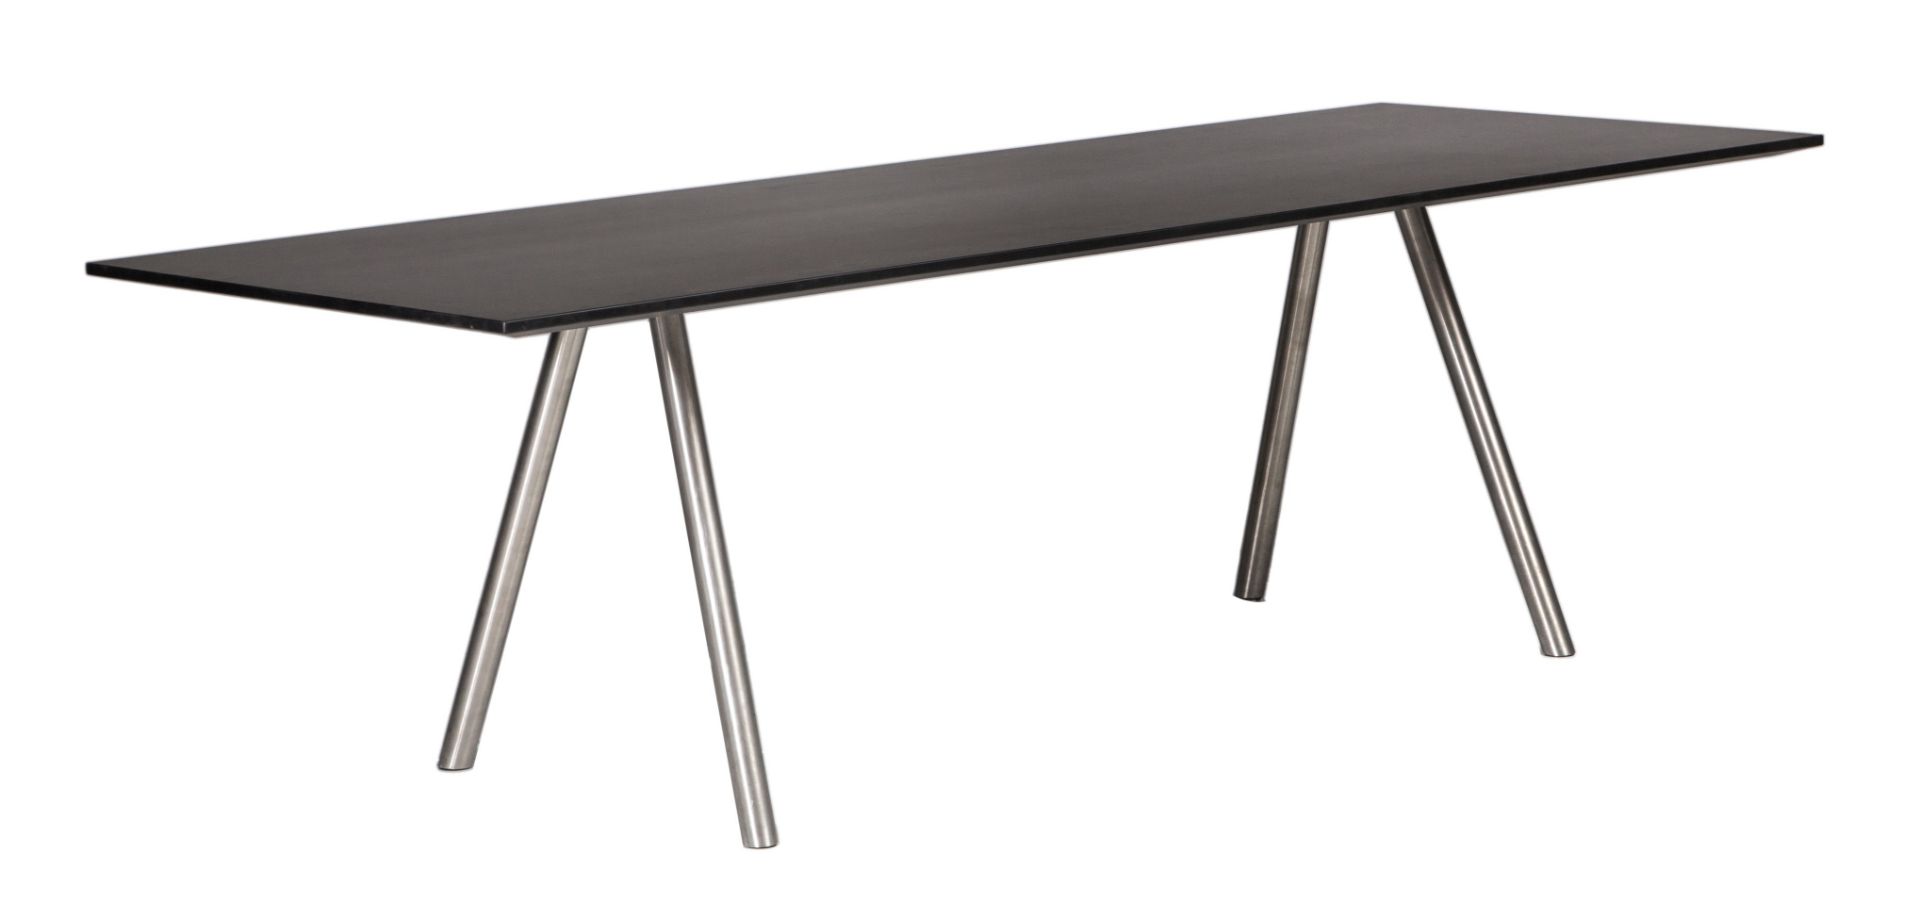 An A-Table by Maarten van Severen for Vitra, H 72,5 - W 240 - D 90 cm - Image 3 of 22